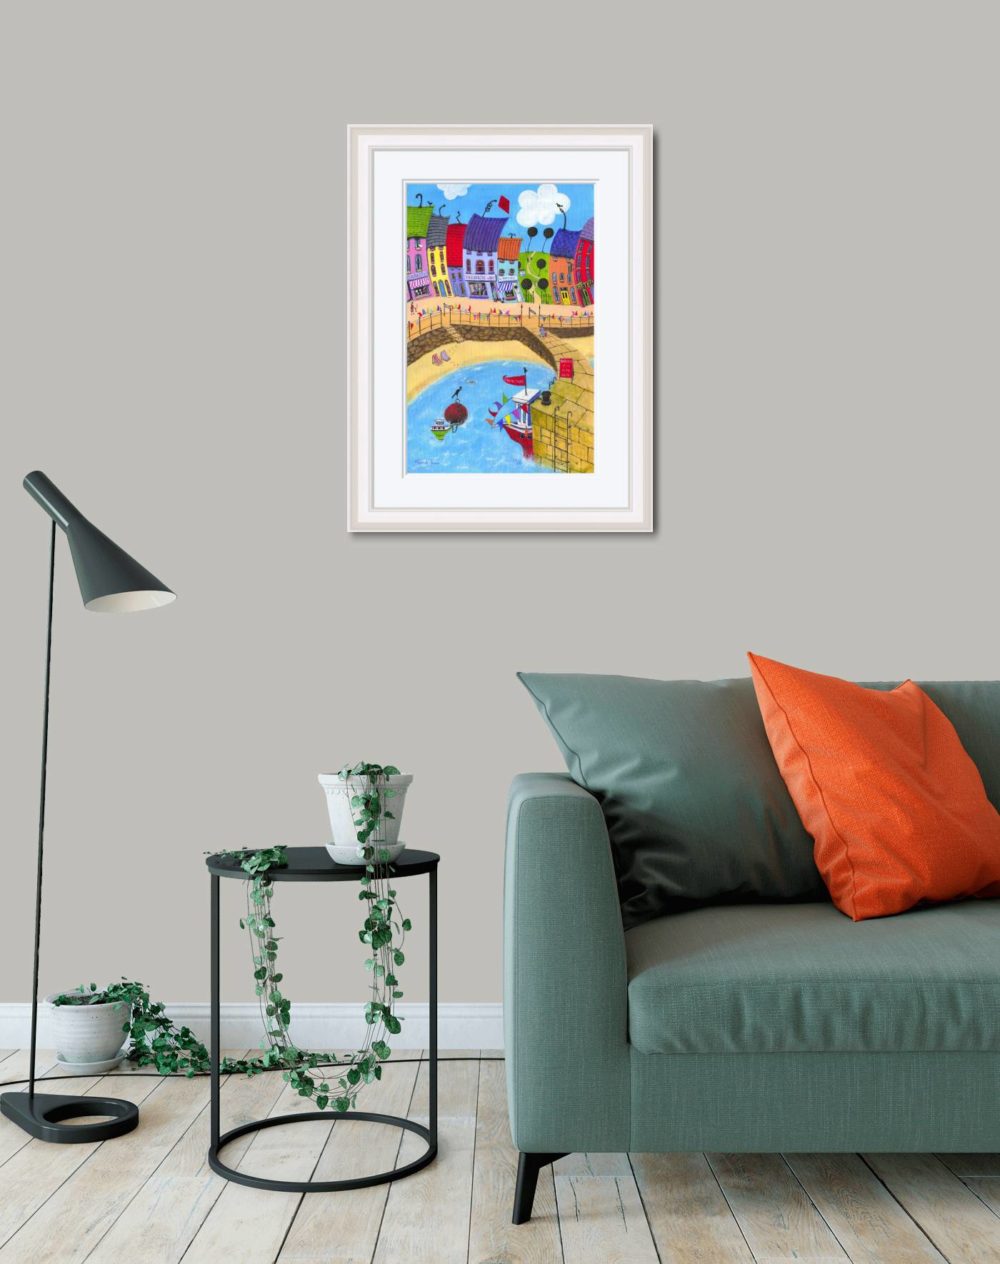 A Day At The Coast Print (Small) In White Frame In Room